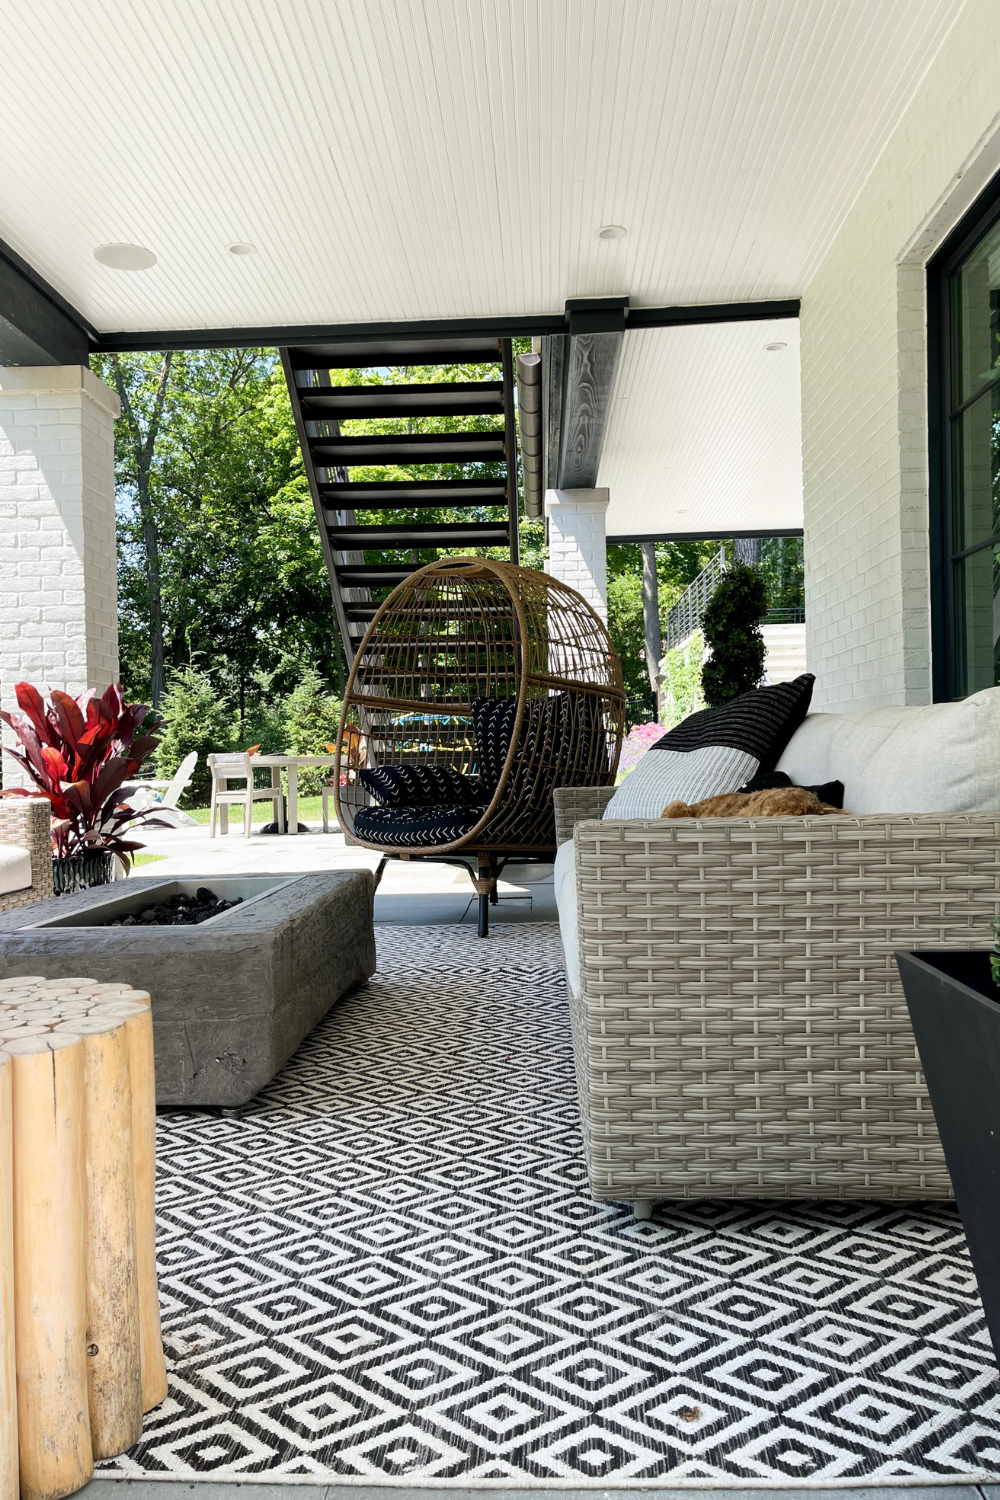 A photo of Suzanne's outdoor patio with an egg chair and wicker furniture